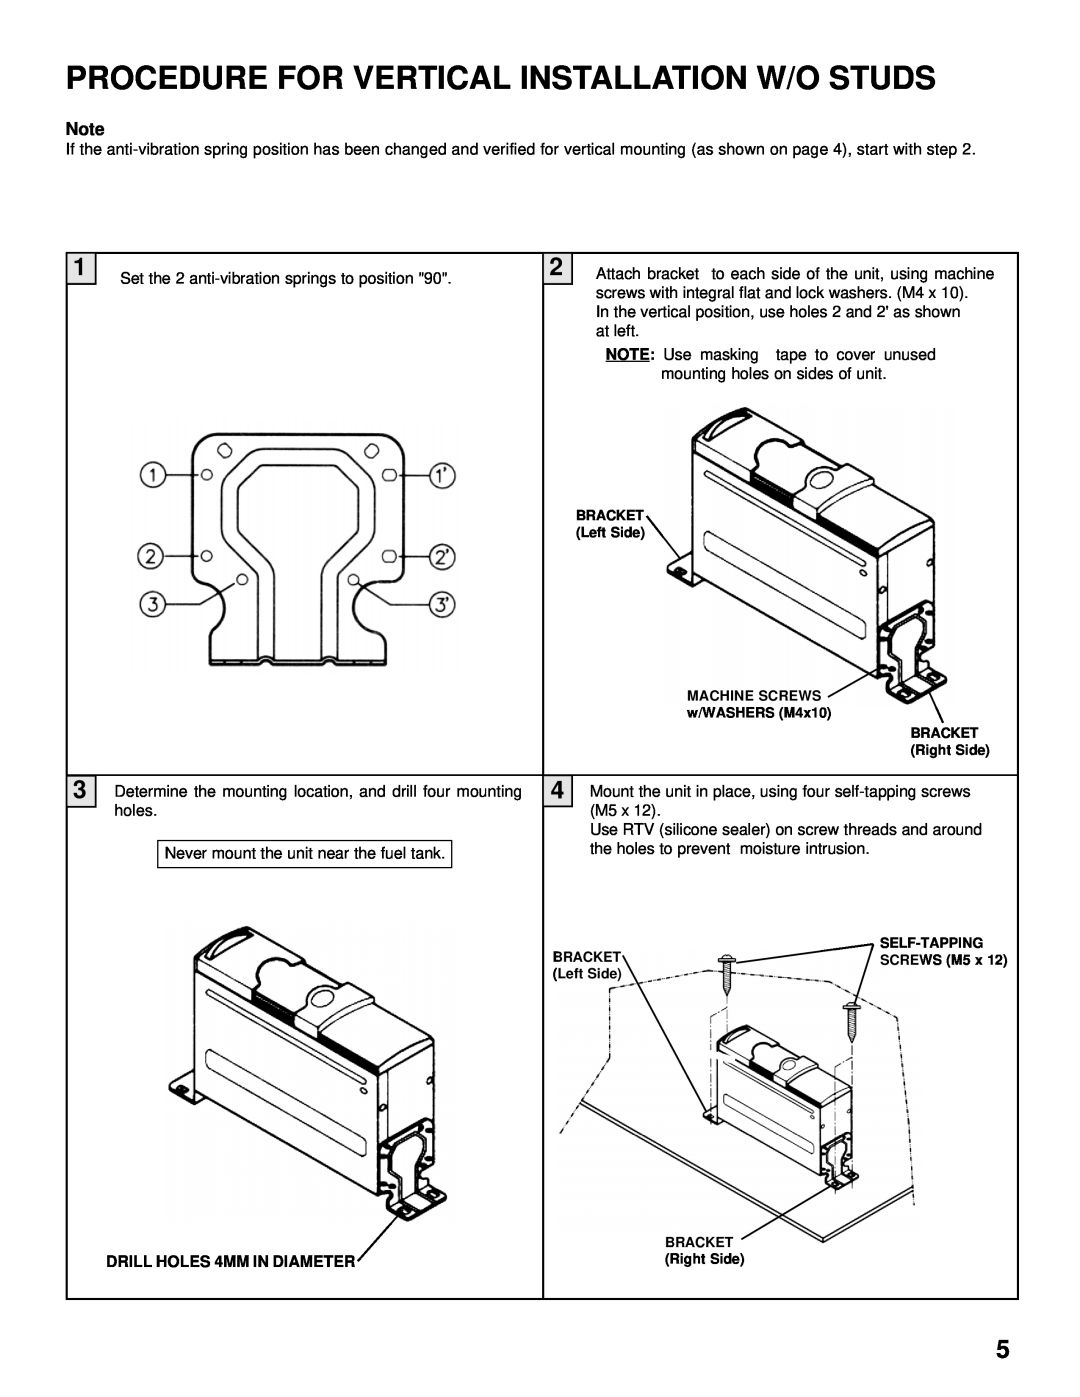 Audiovox SP-11CD installation manual Procedure For Vertical Installation W/O Studs, DRILL HOLES 4MM IN DIAMETER 